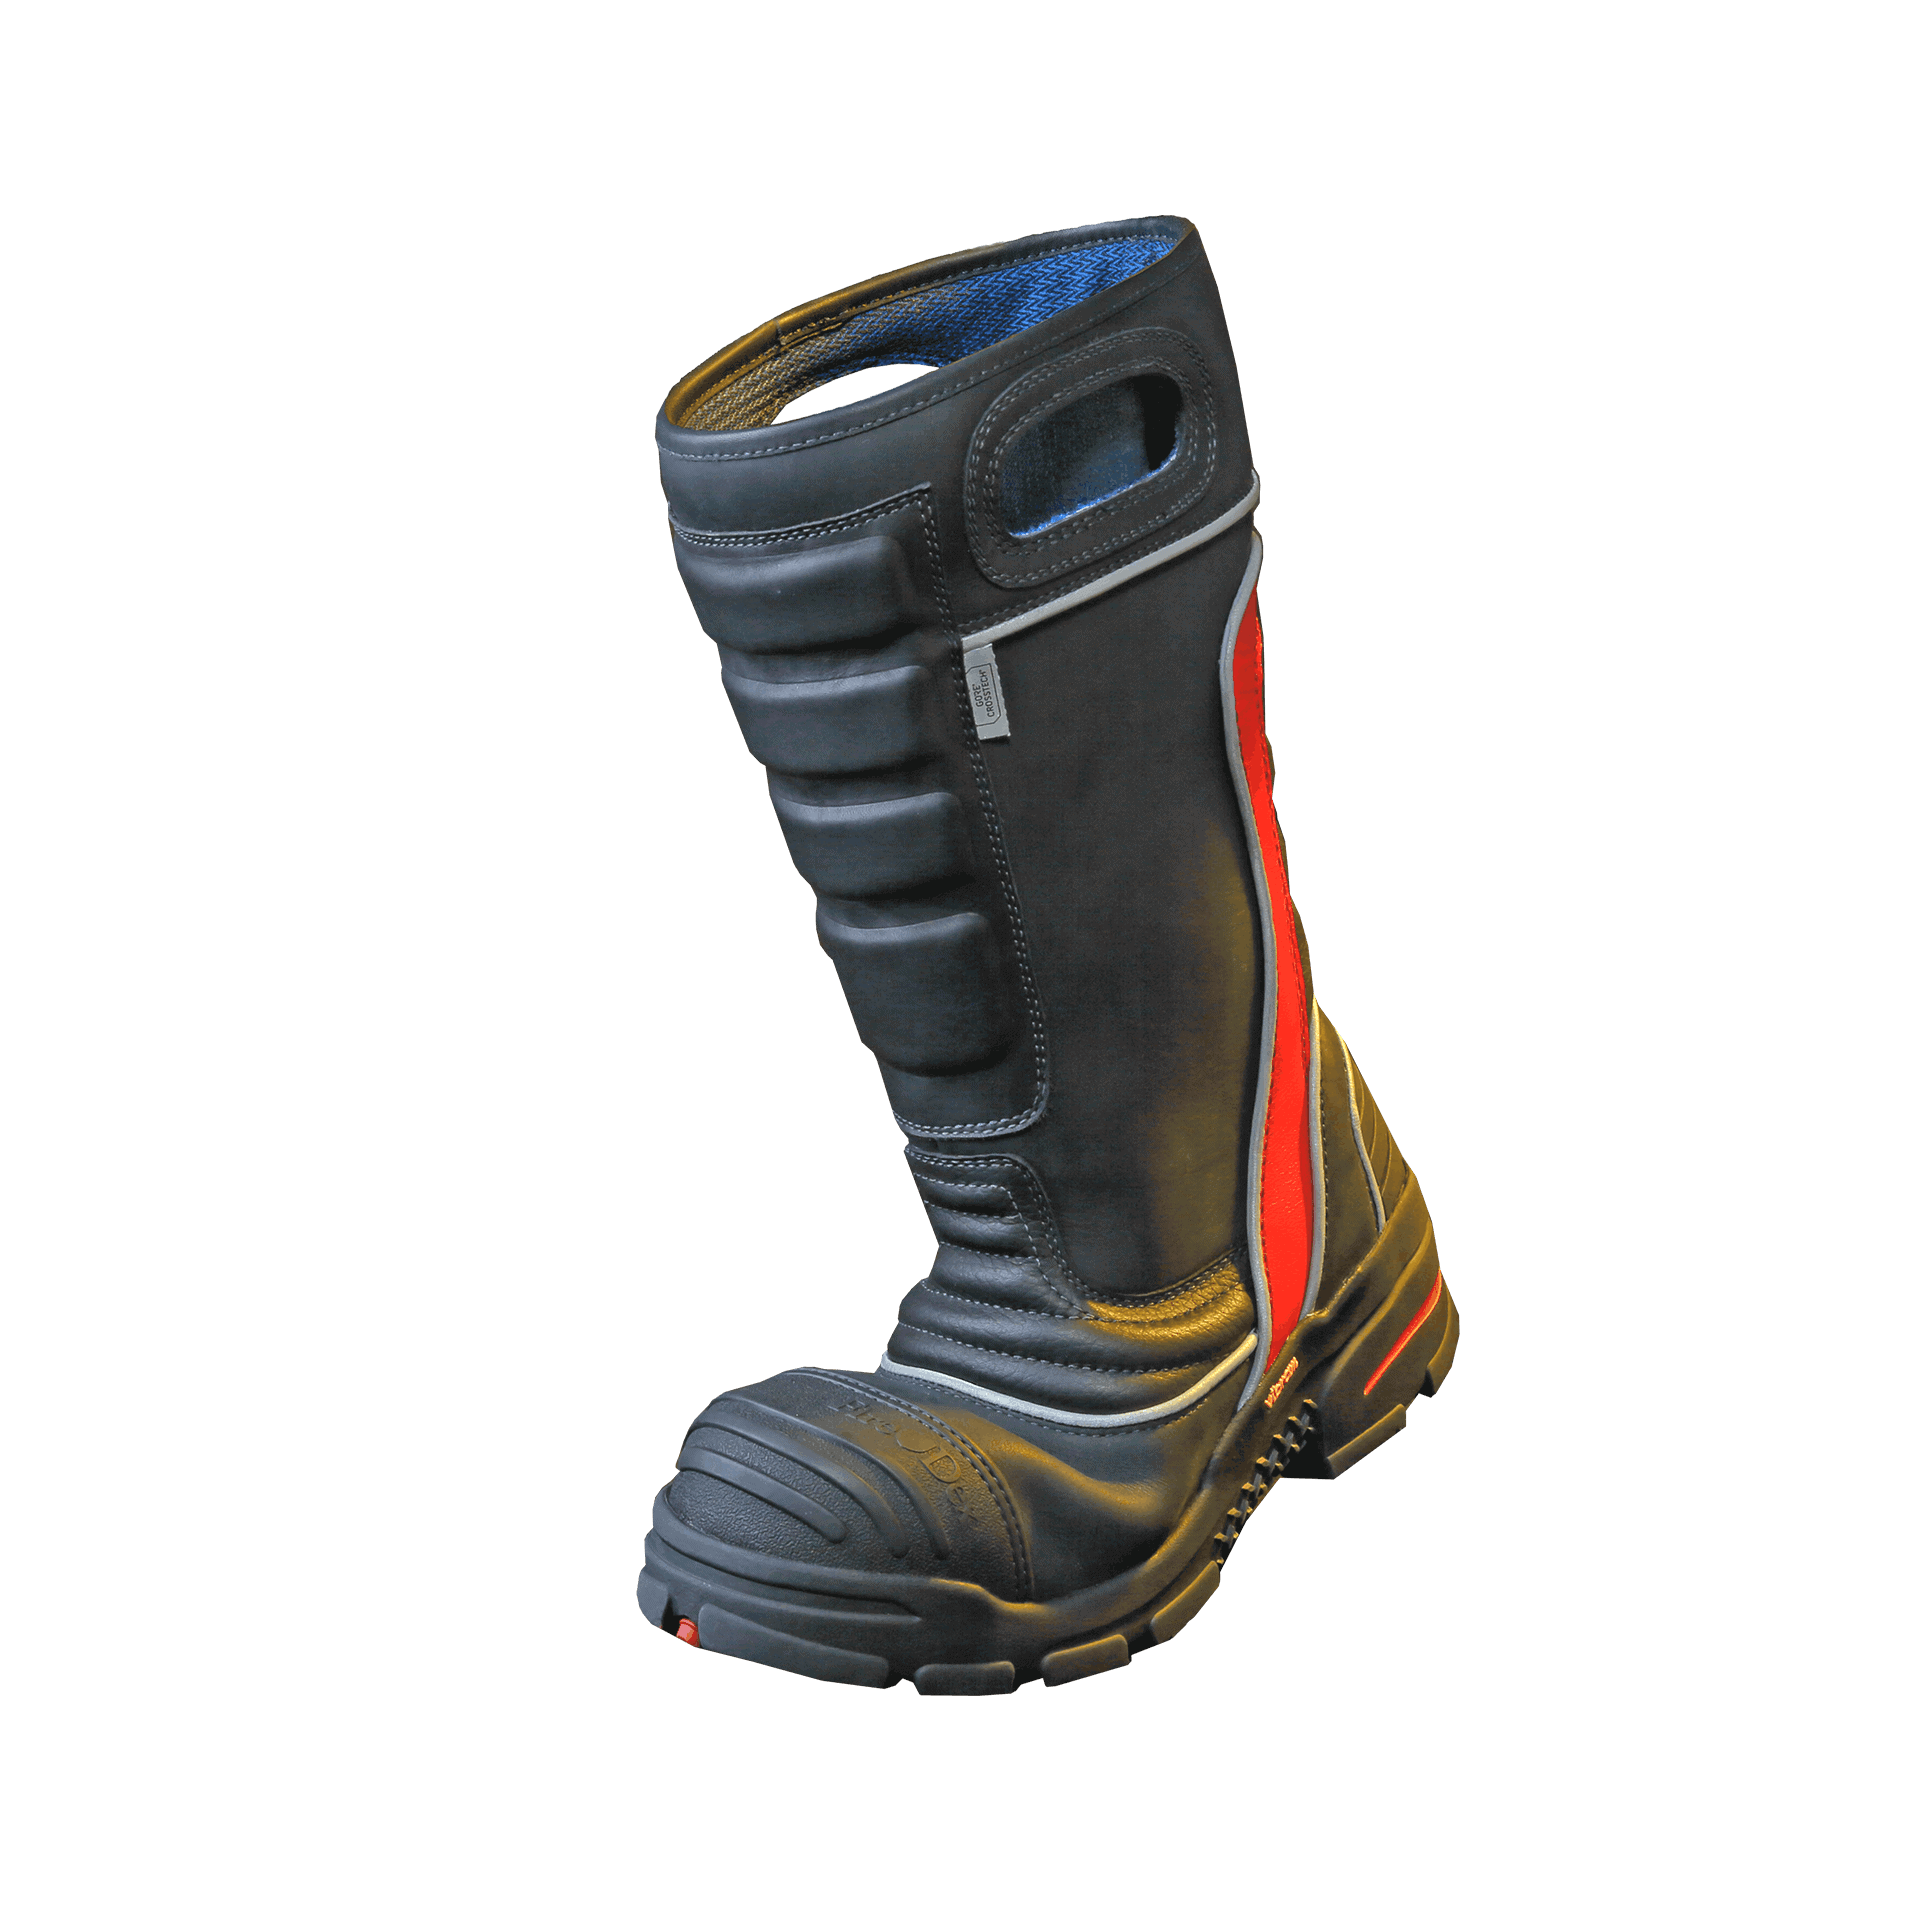 Fire-Dex Leather Boot (FDXL200)  | Fire Store | Fuego Fire Center | Firefighter Gear | Built to keep you energized during long 24 hour days, the FDXL200 Structural Firefighting Boot outperforms standards with a combination of technologies and materials that make it the best choice for slip resistance, flame resistance, liquid and bacterial protection, comfort and durability. Certified to NFPA 1971 & 1992